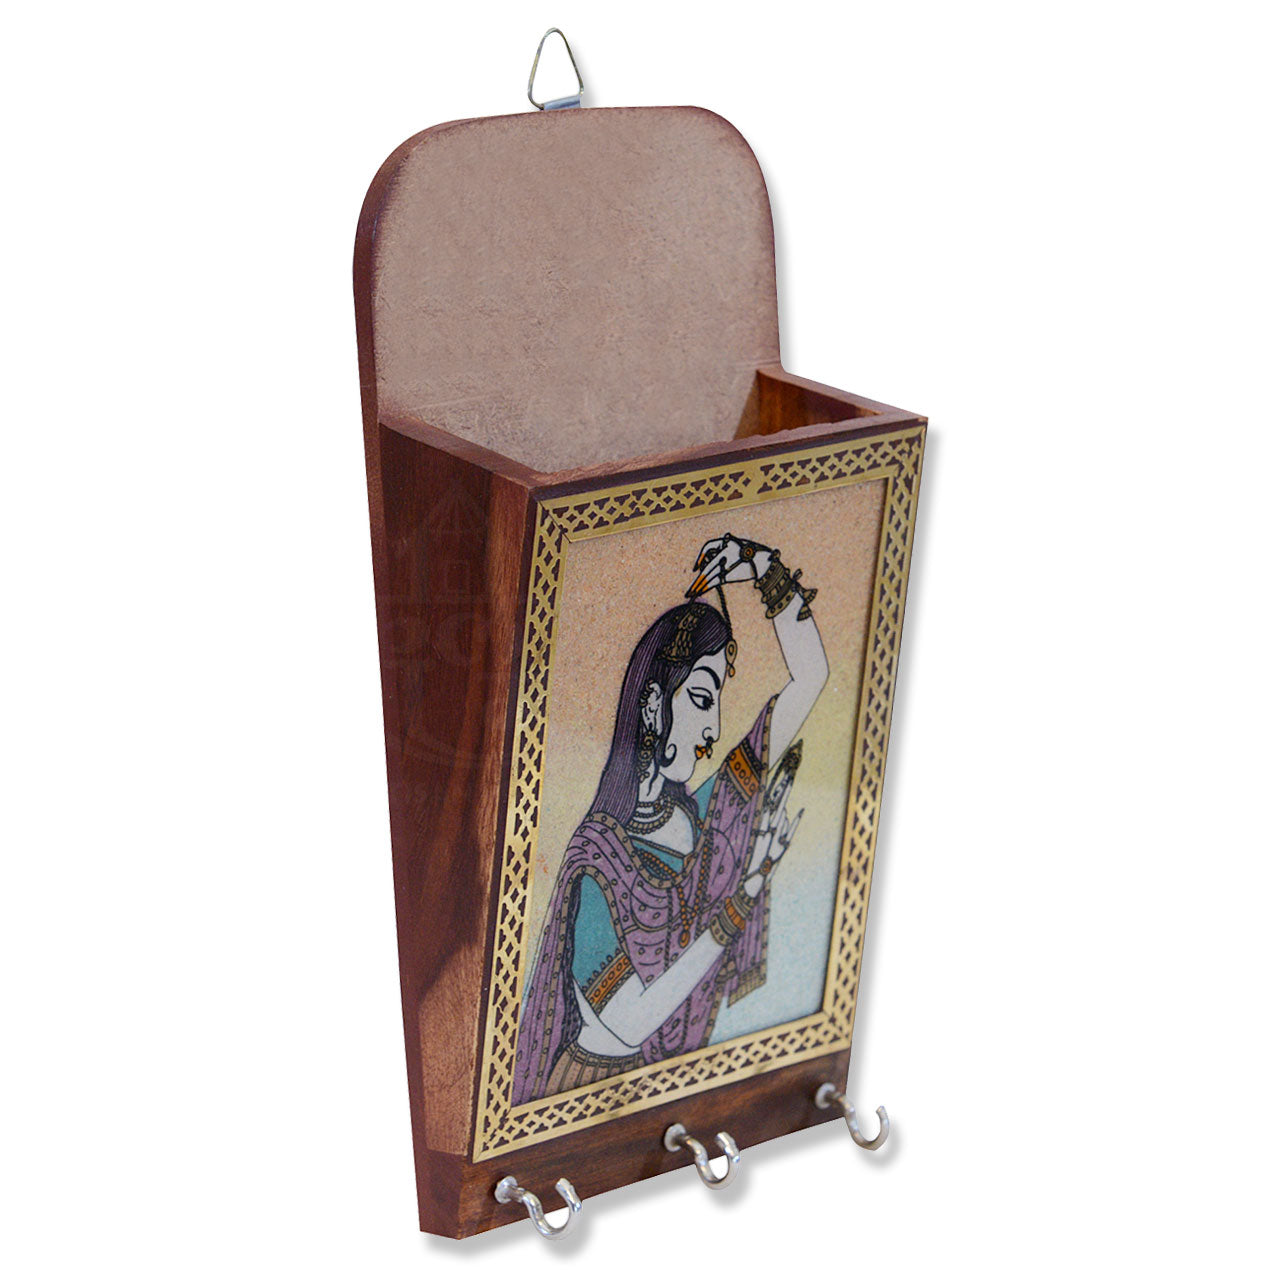 Multipurpose Traditional Rajasthani Painting Wooden Letterhead and Key Holder